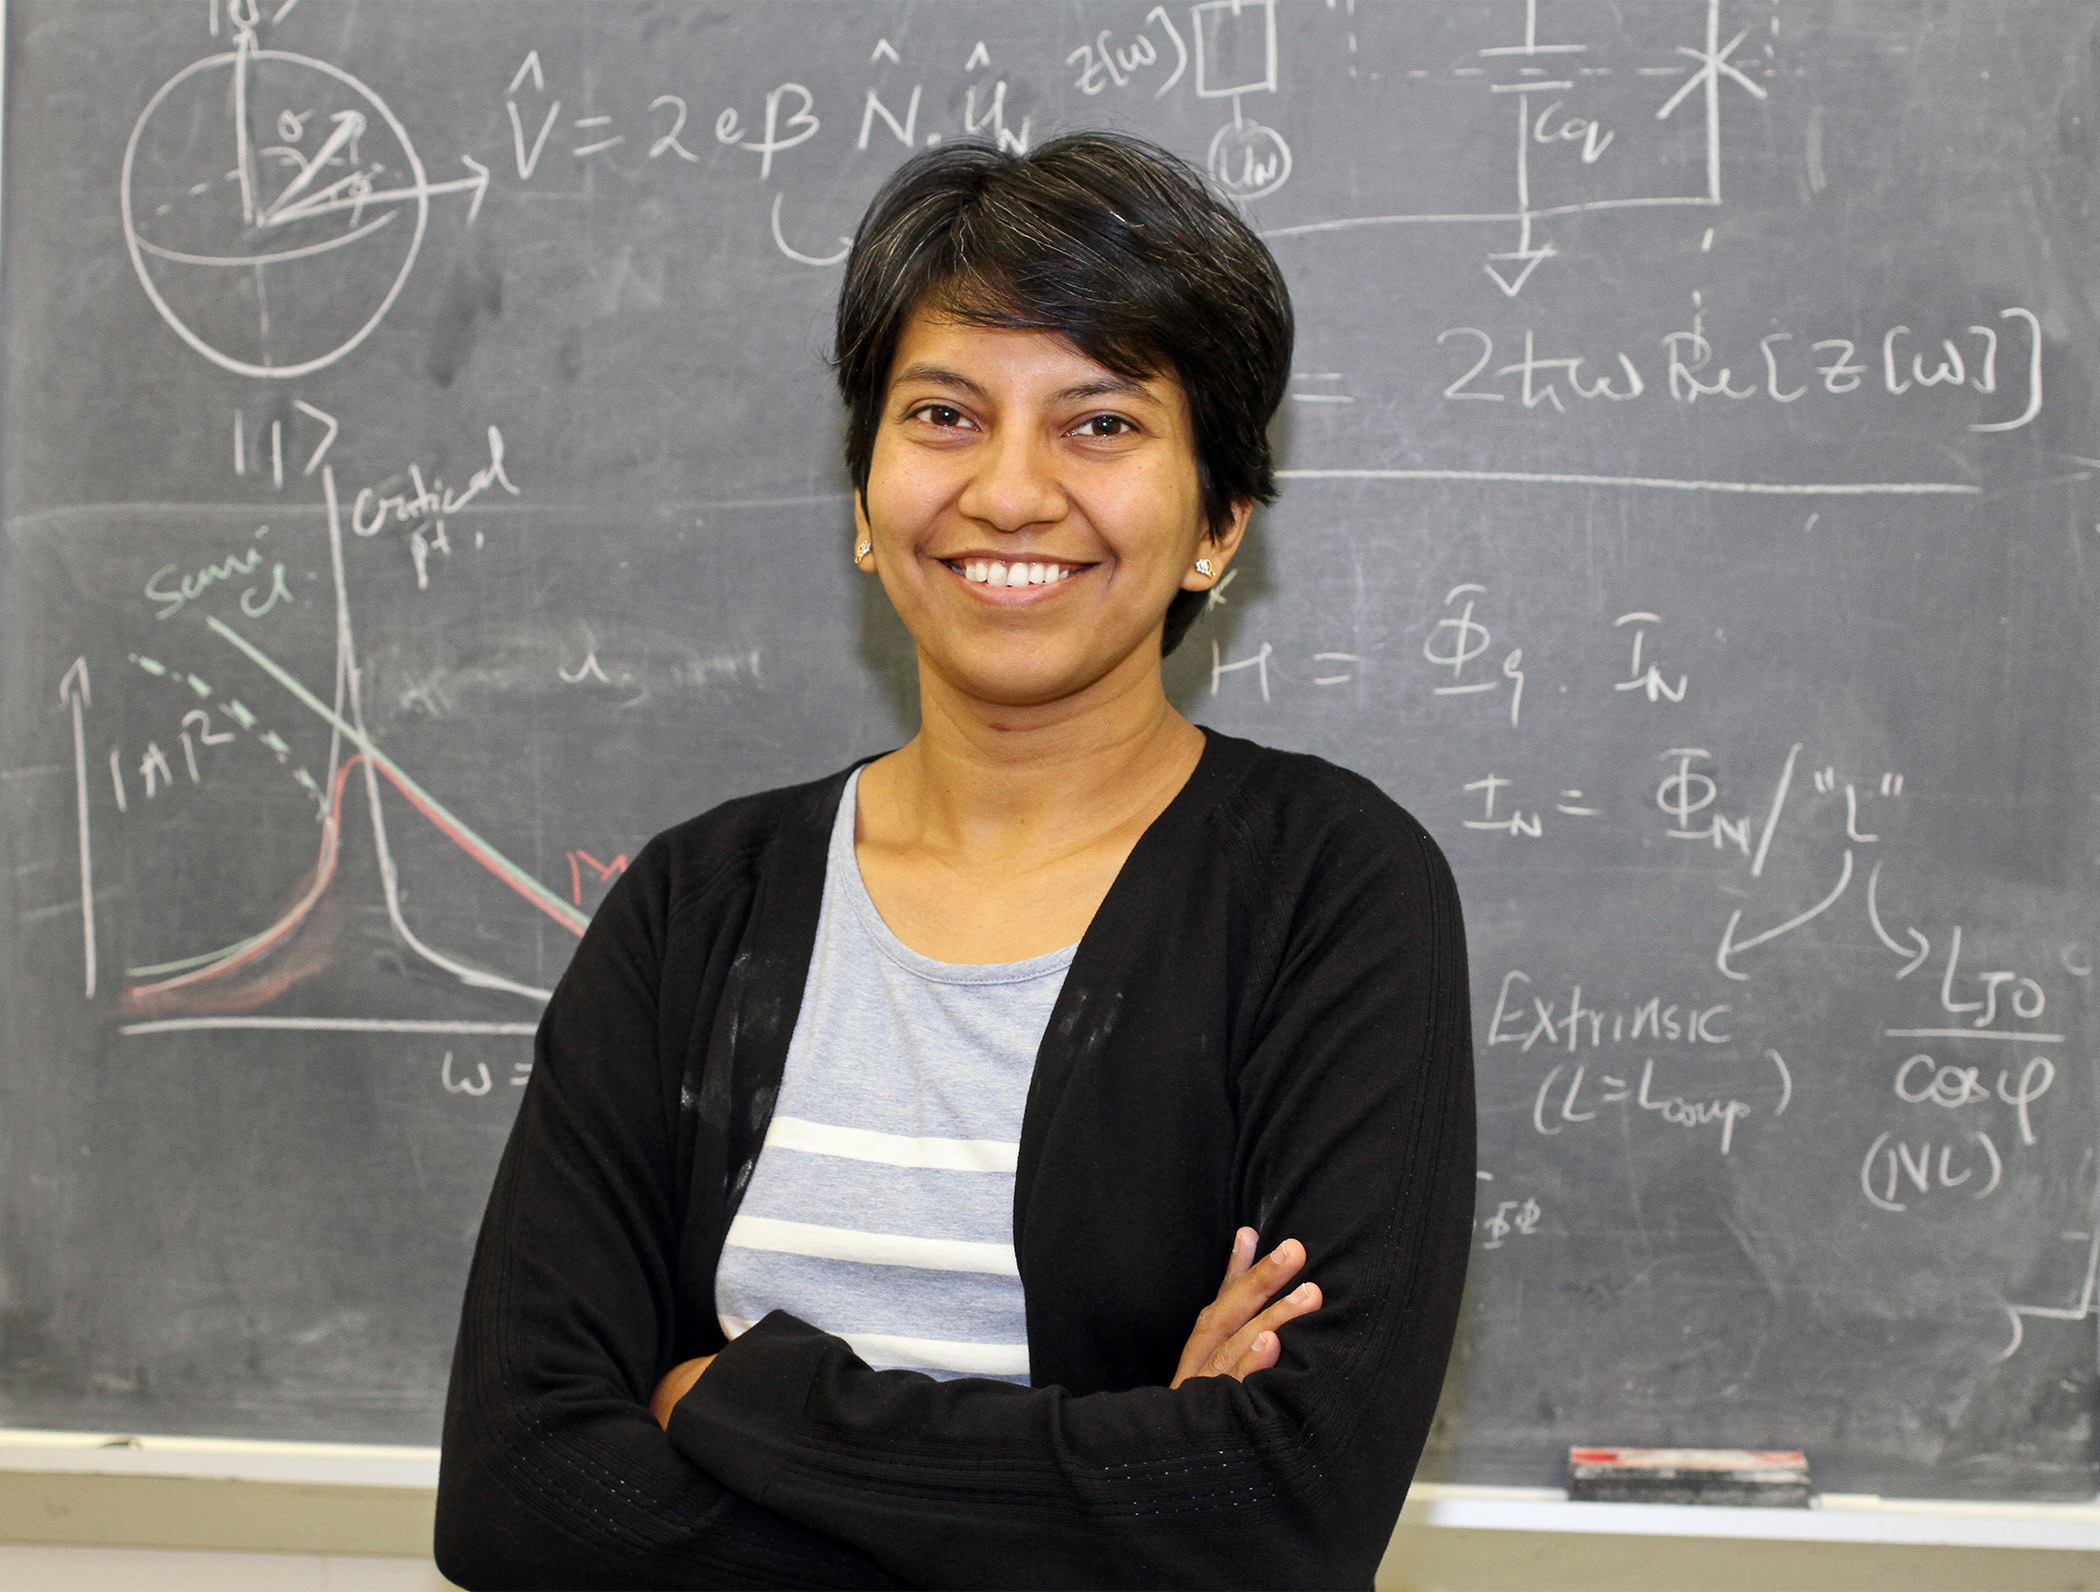 Physics Professor Archana Kamal smiling in front of a chalk board with writing and illustrations on it.